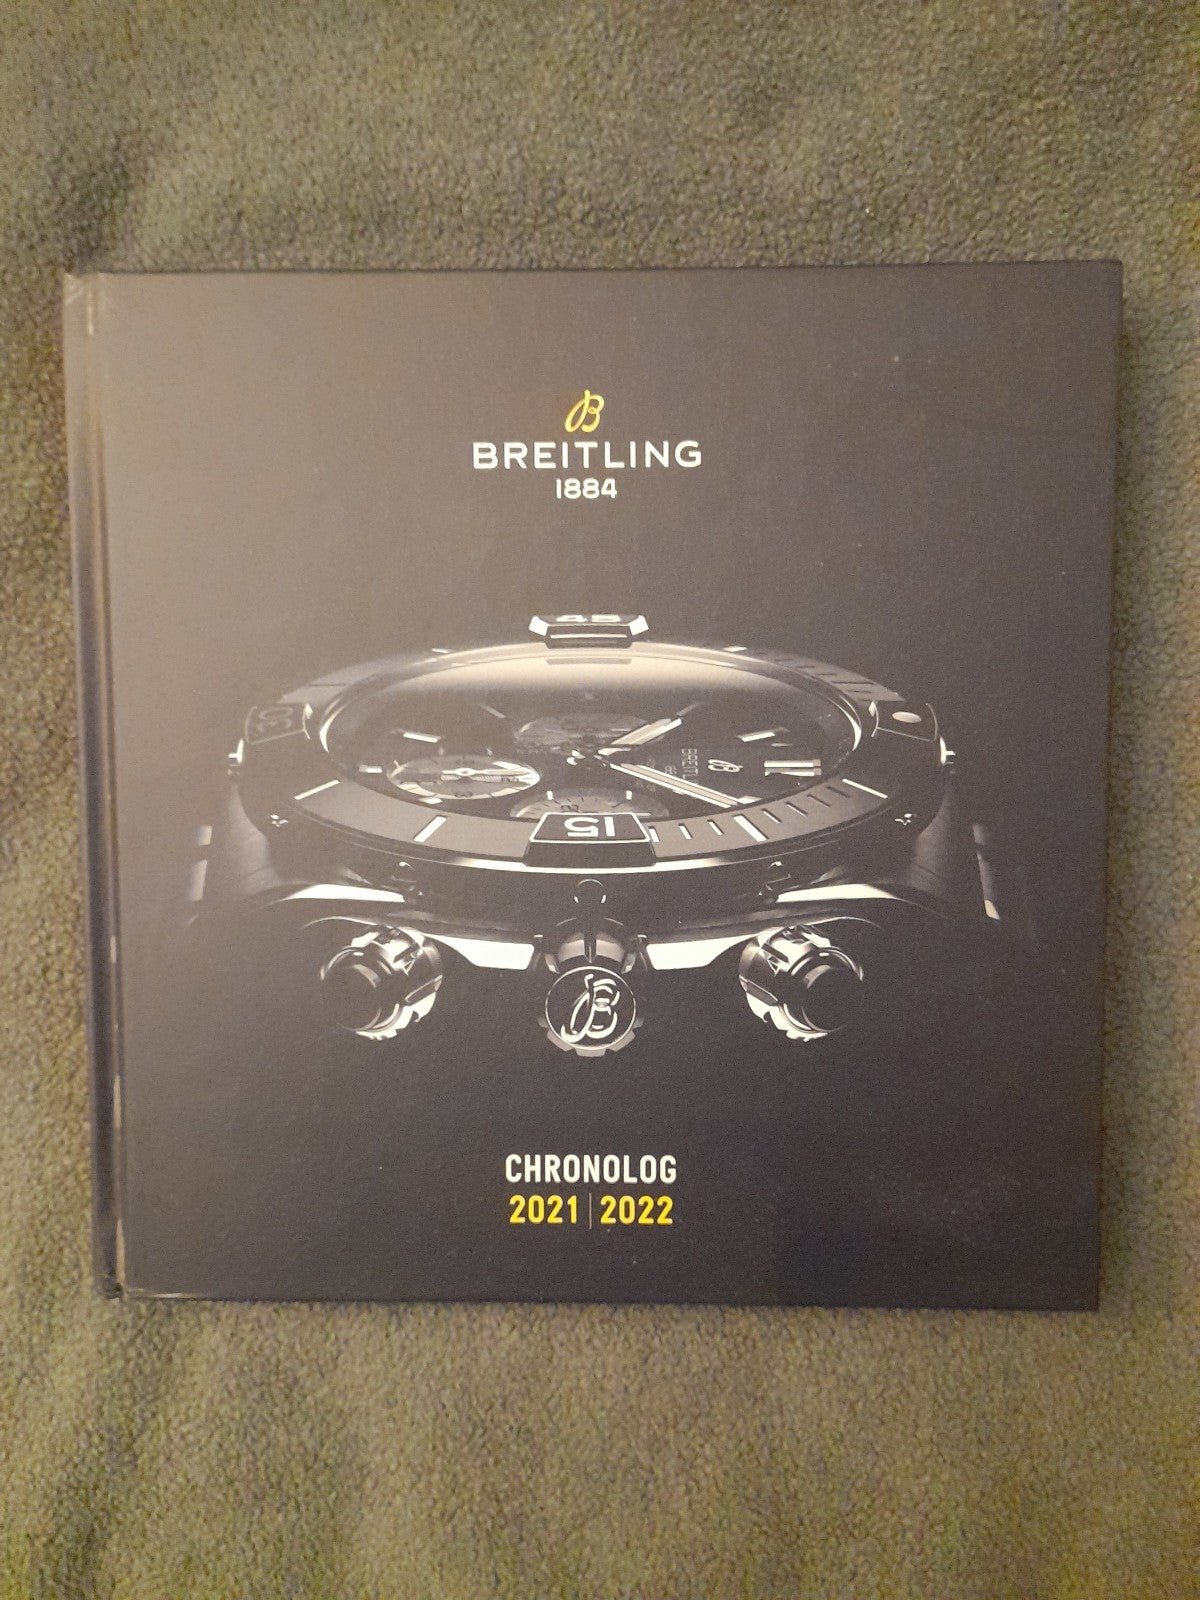 Breitling collection of fine timepieces Book Q6vGquK9F